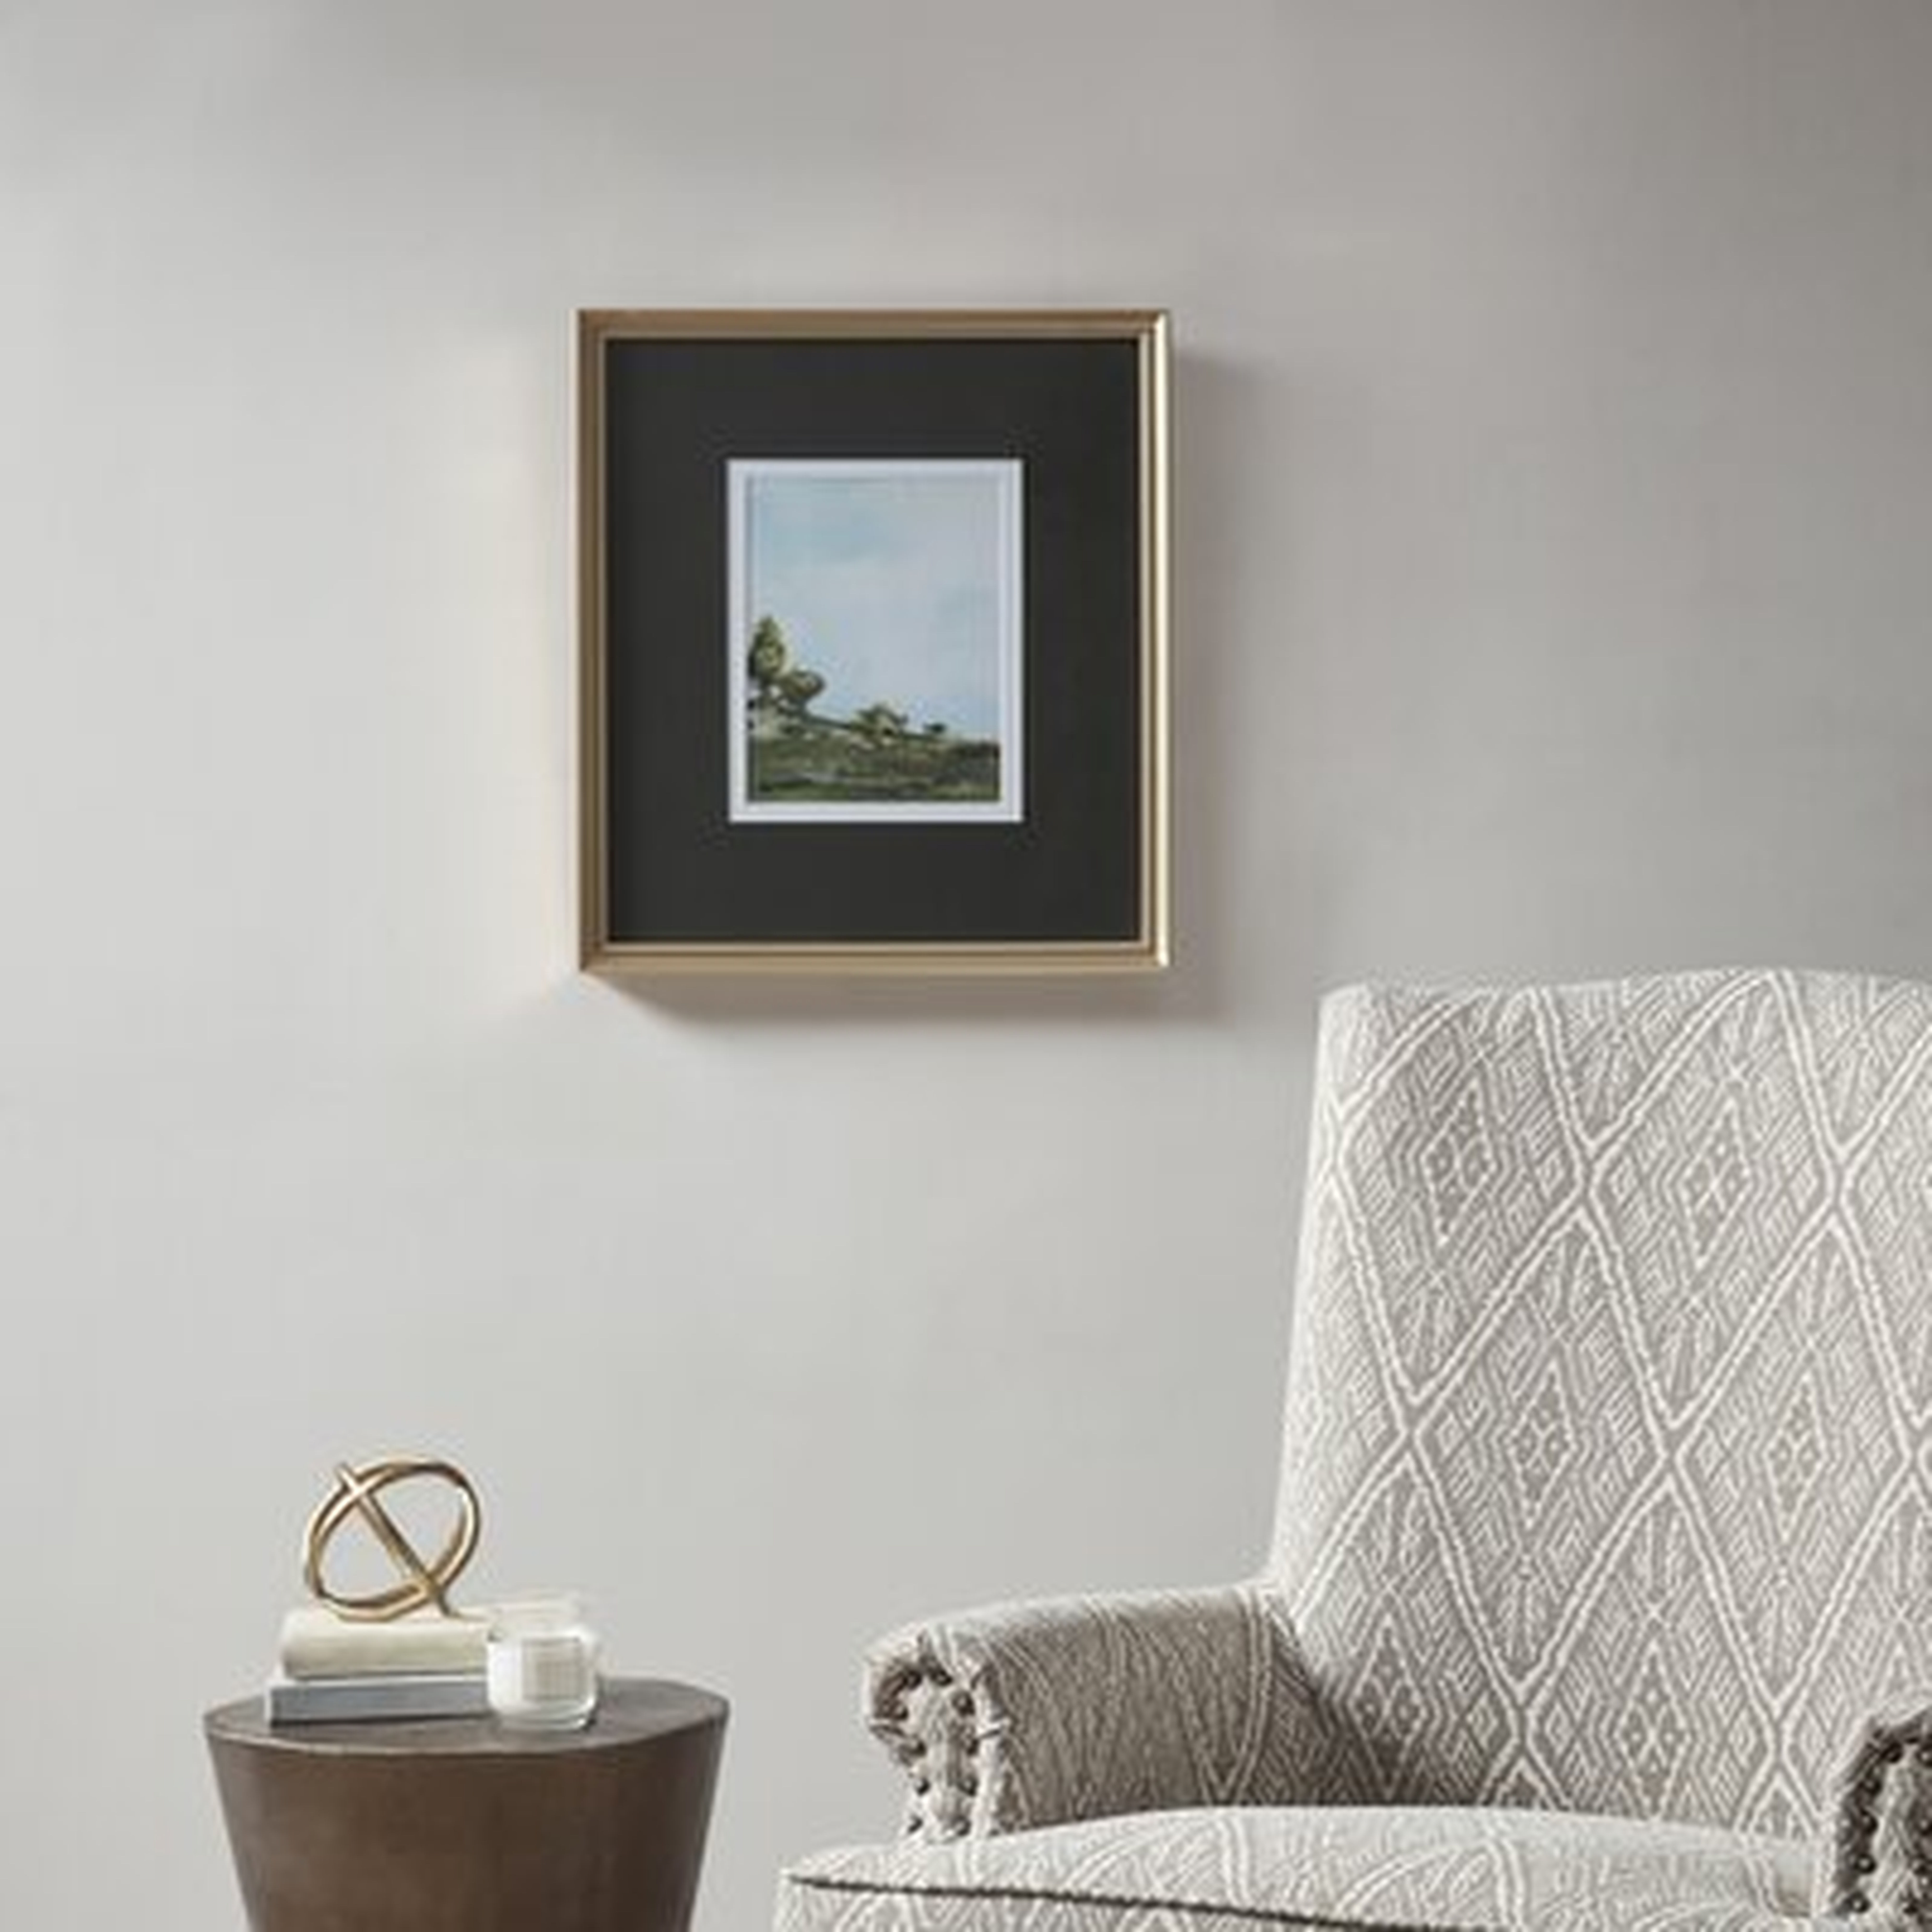 Across The Plains 1 Picture Frame Graphic Art Print on Paper - Birch Lane